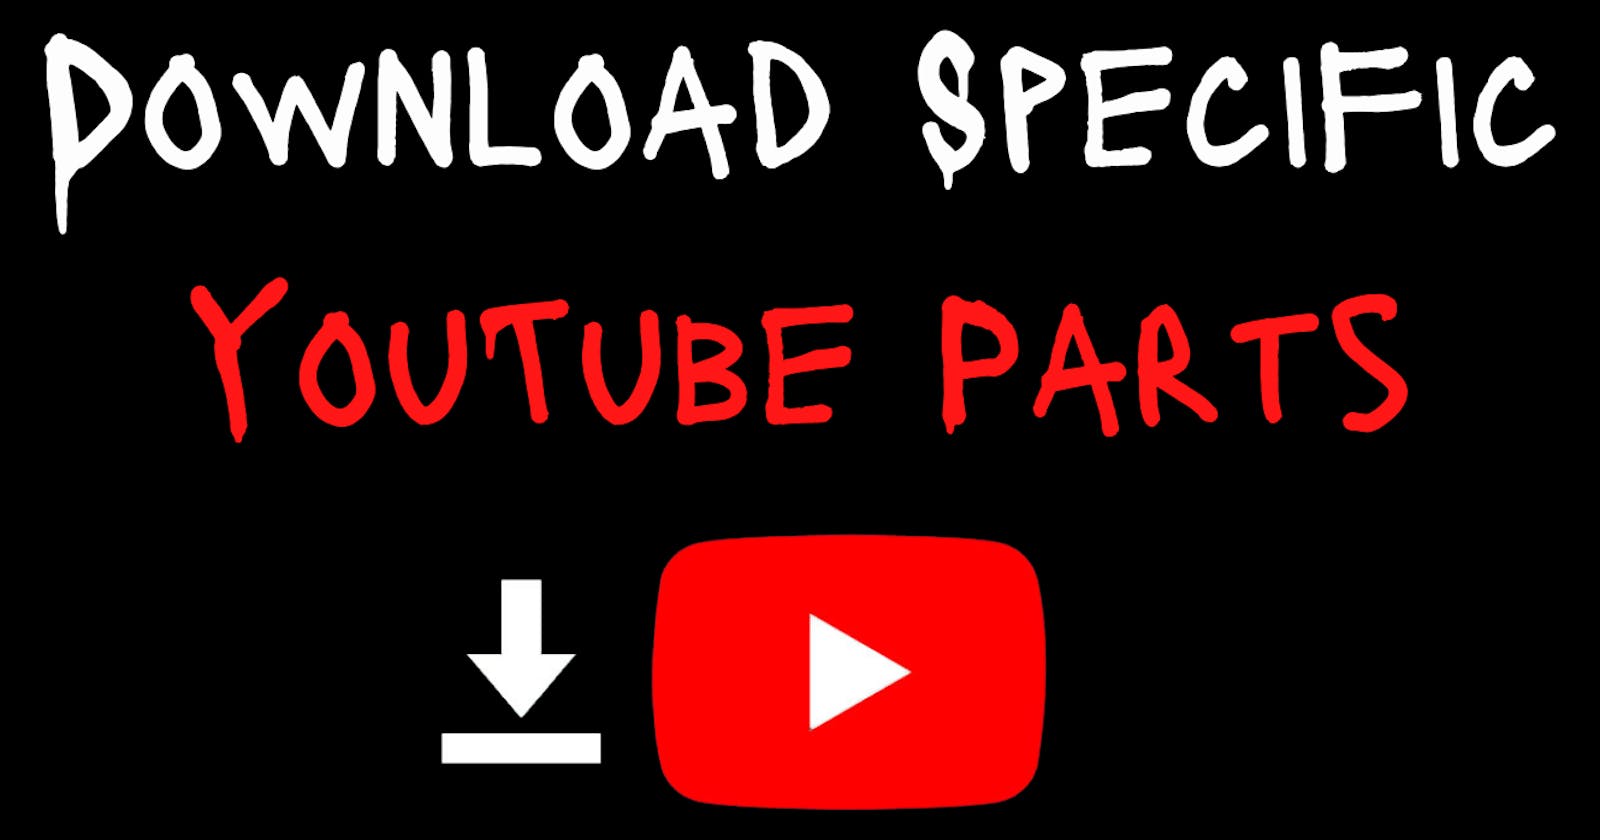 Download Specific YouTube Parts